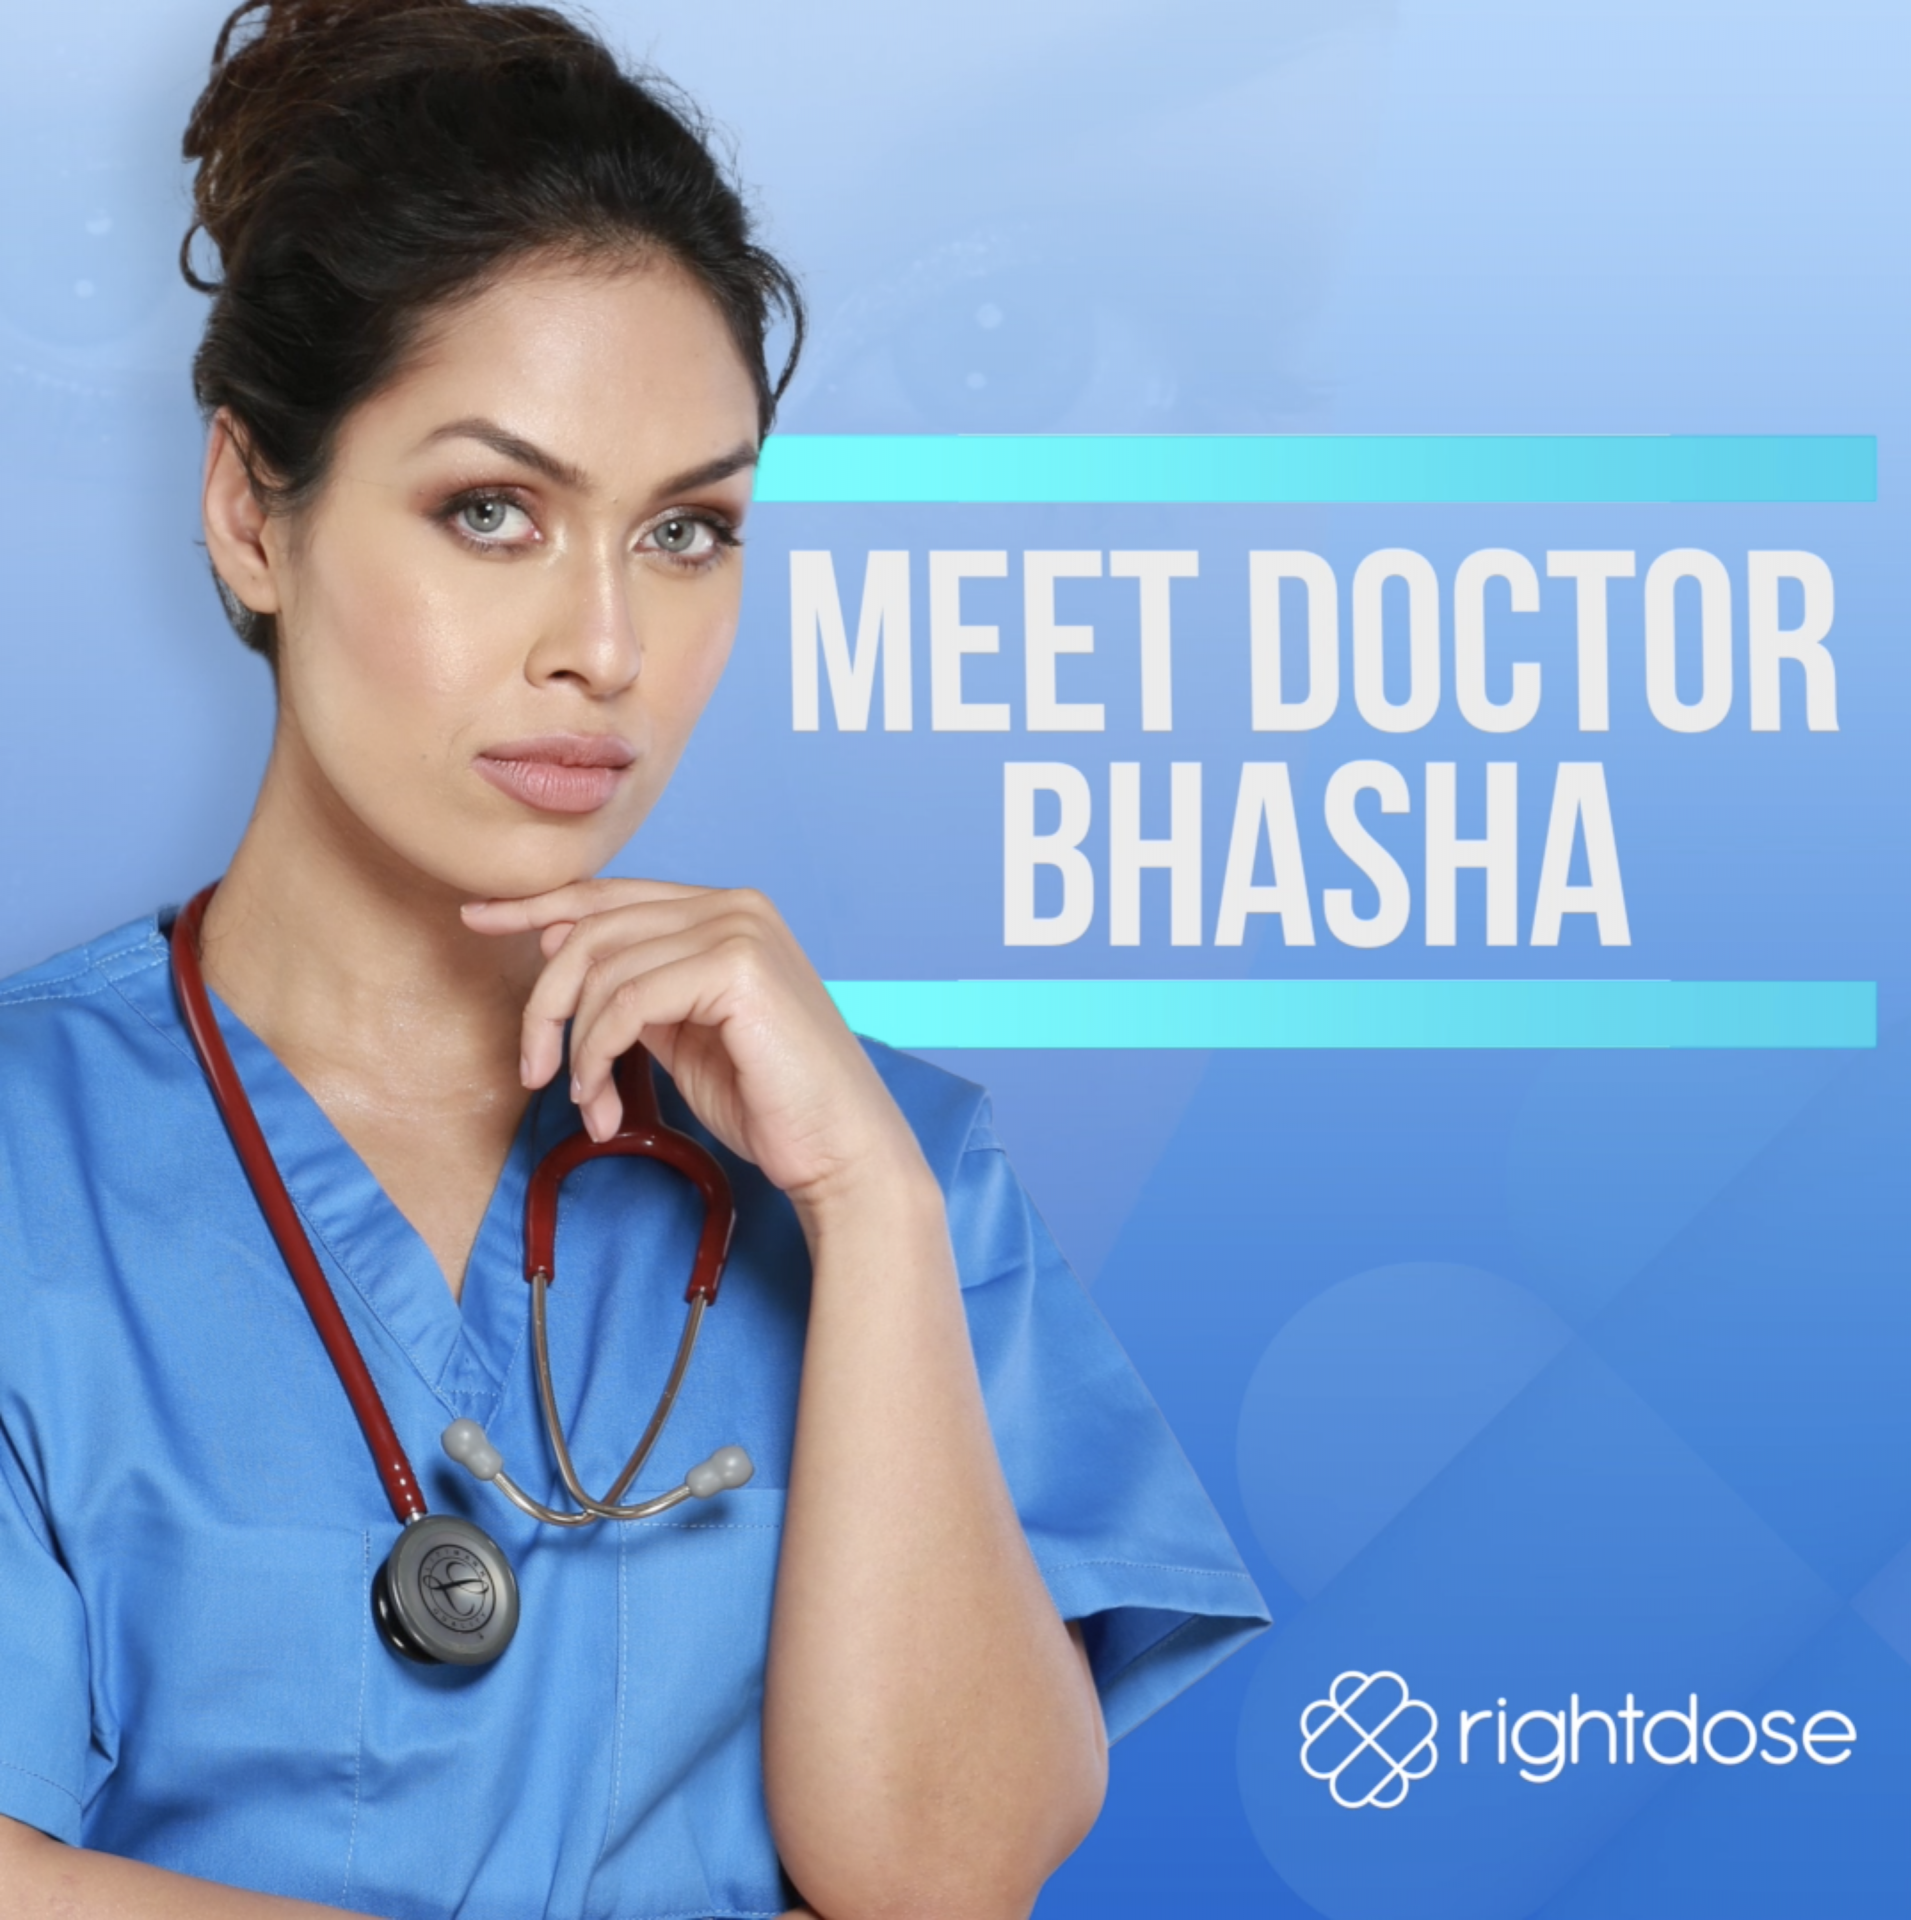 Introducing Rightdose’s resident Doctor ambassador, Bhasha Mukherjee. A junior NHS doctor and reigning Miss England.